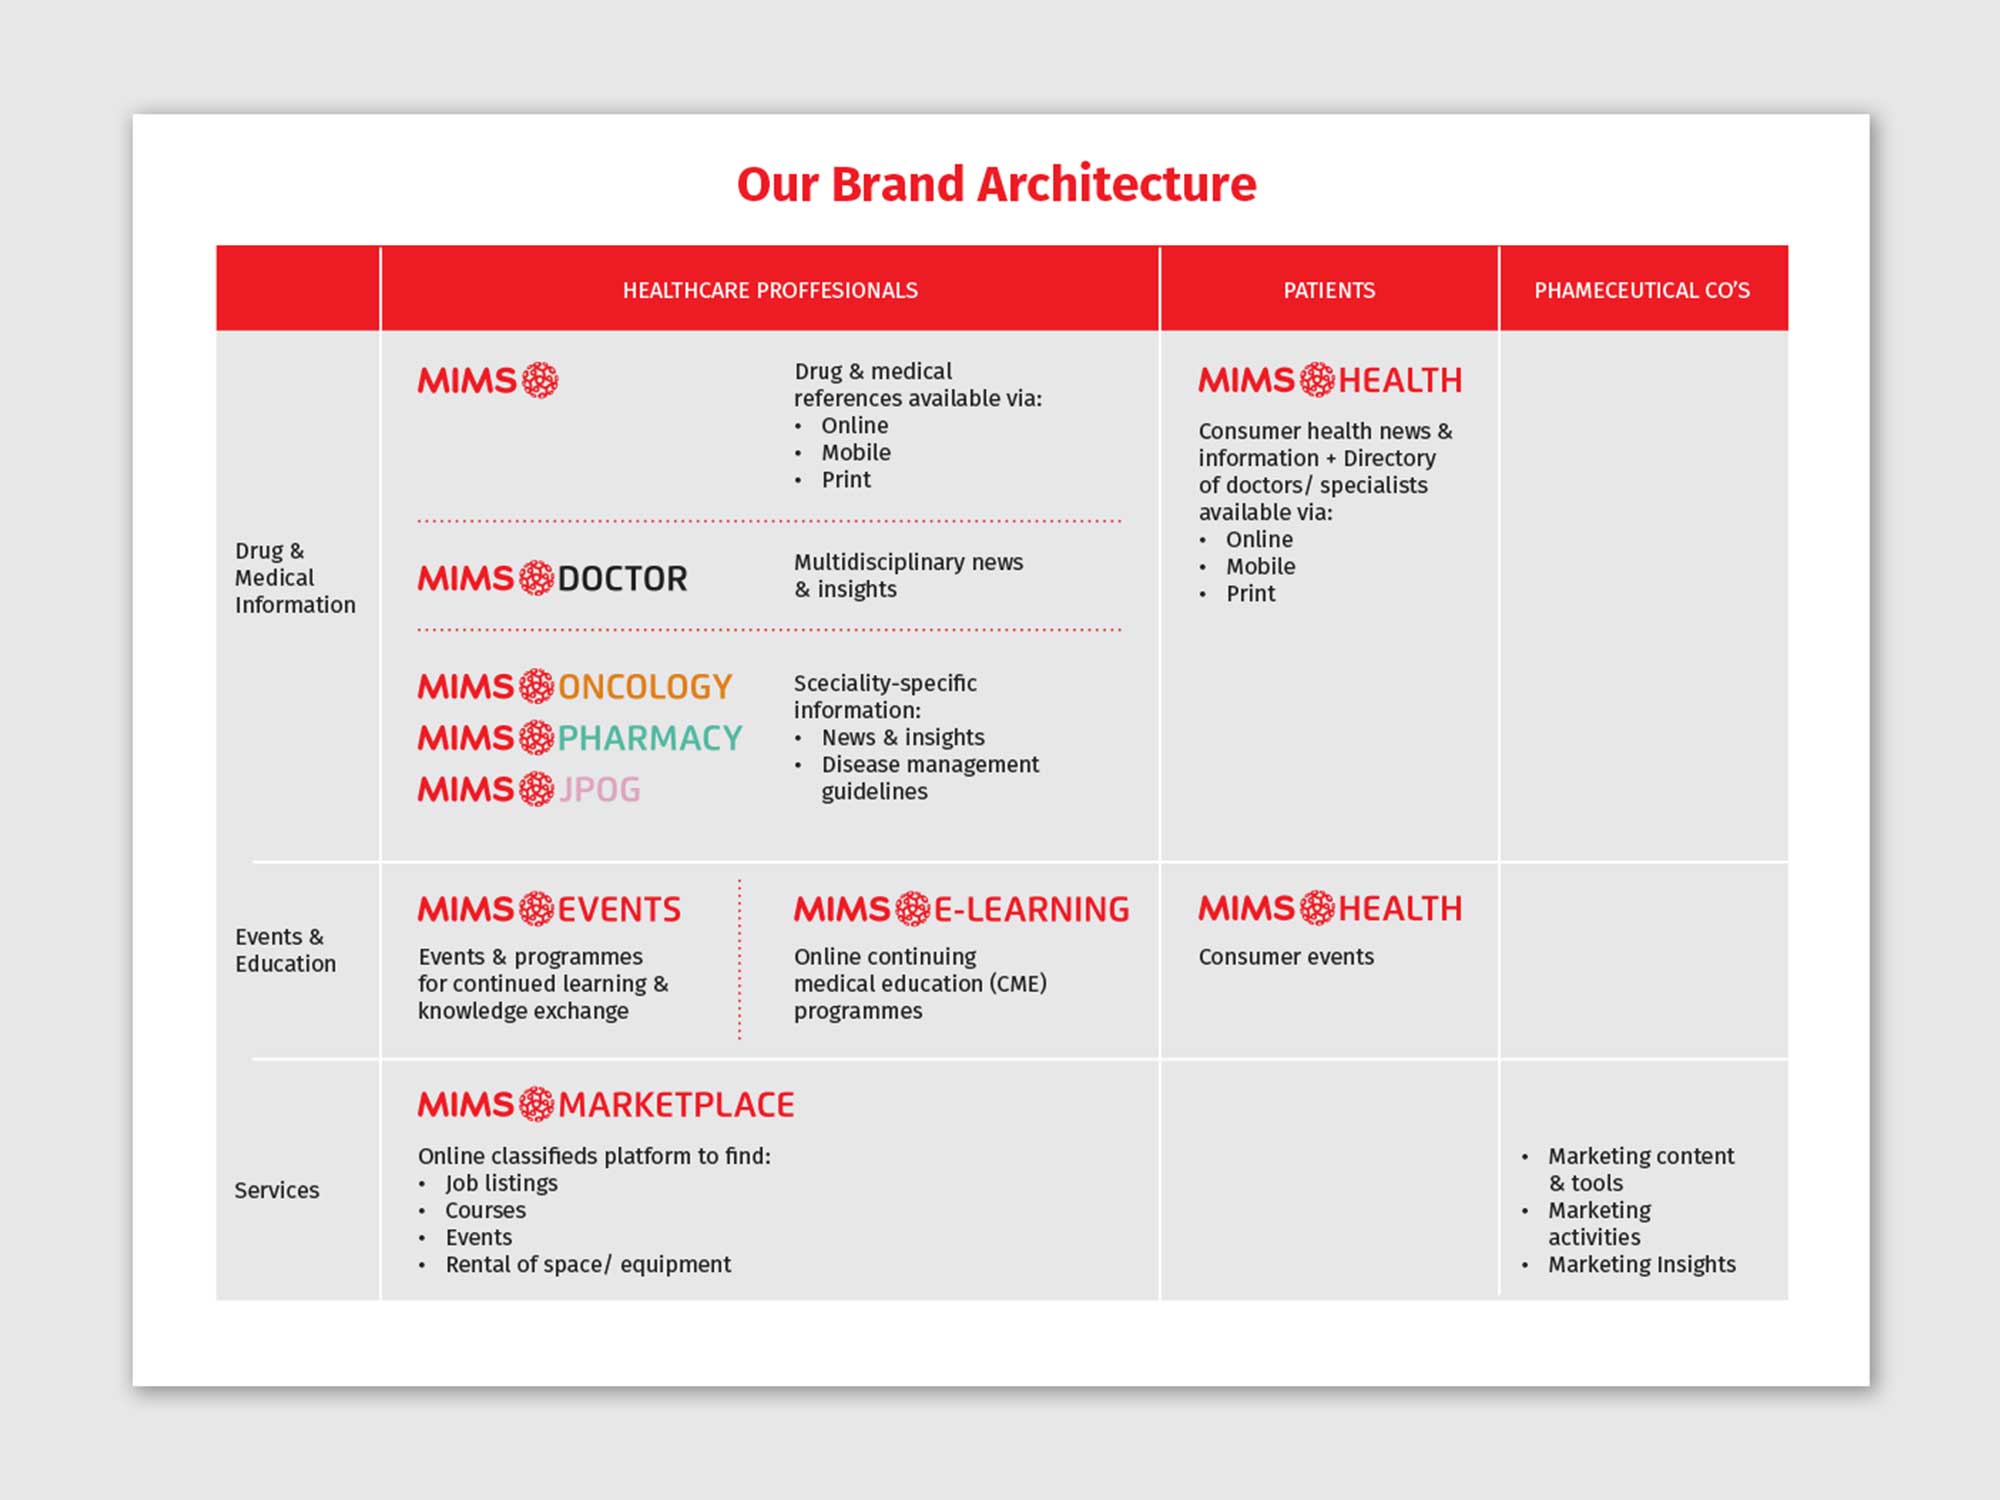 Brand Consultancy in Healthcare Industry. Brand Architecture for MIMS.